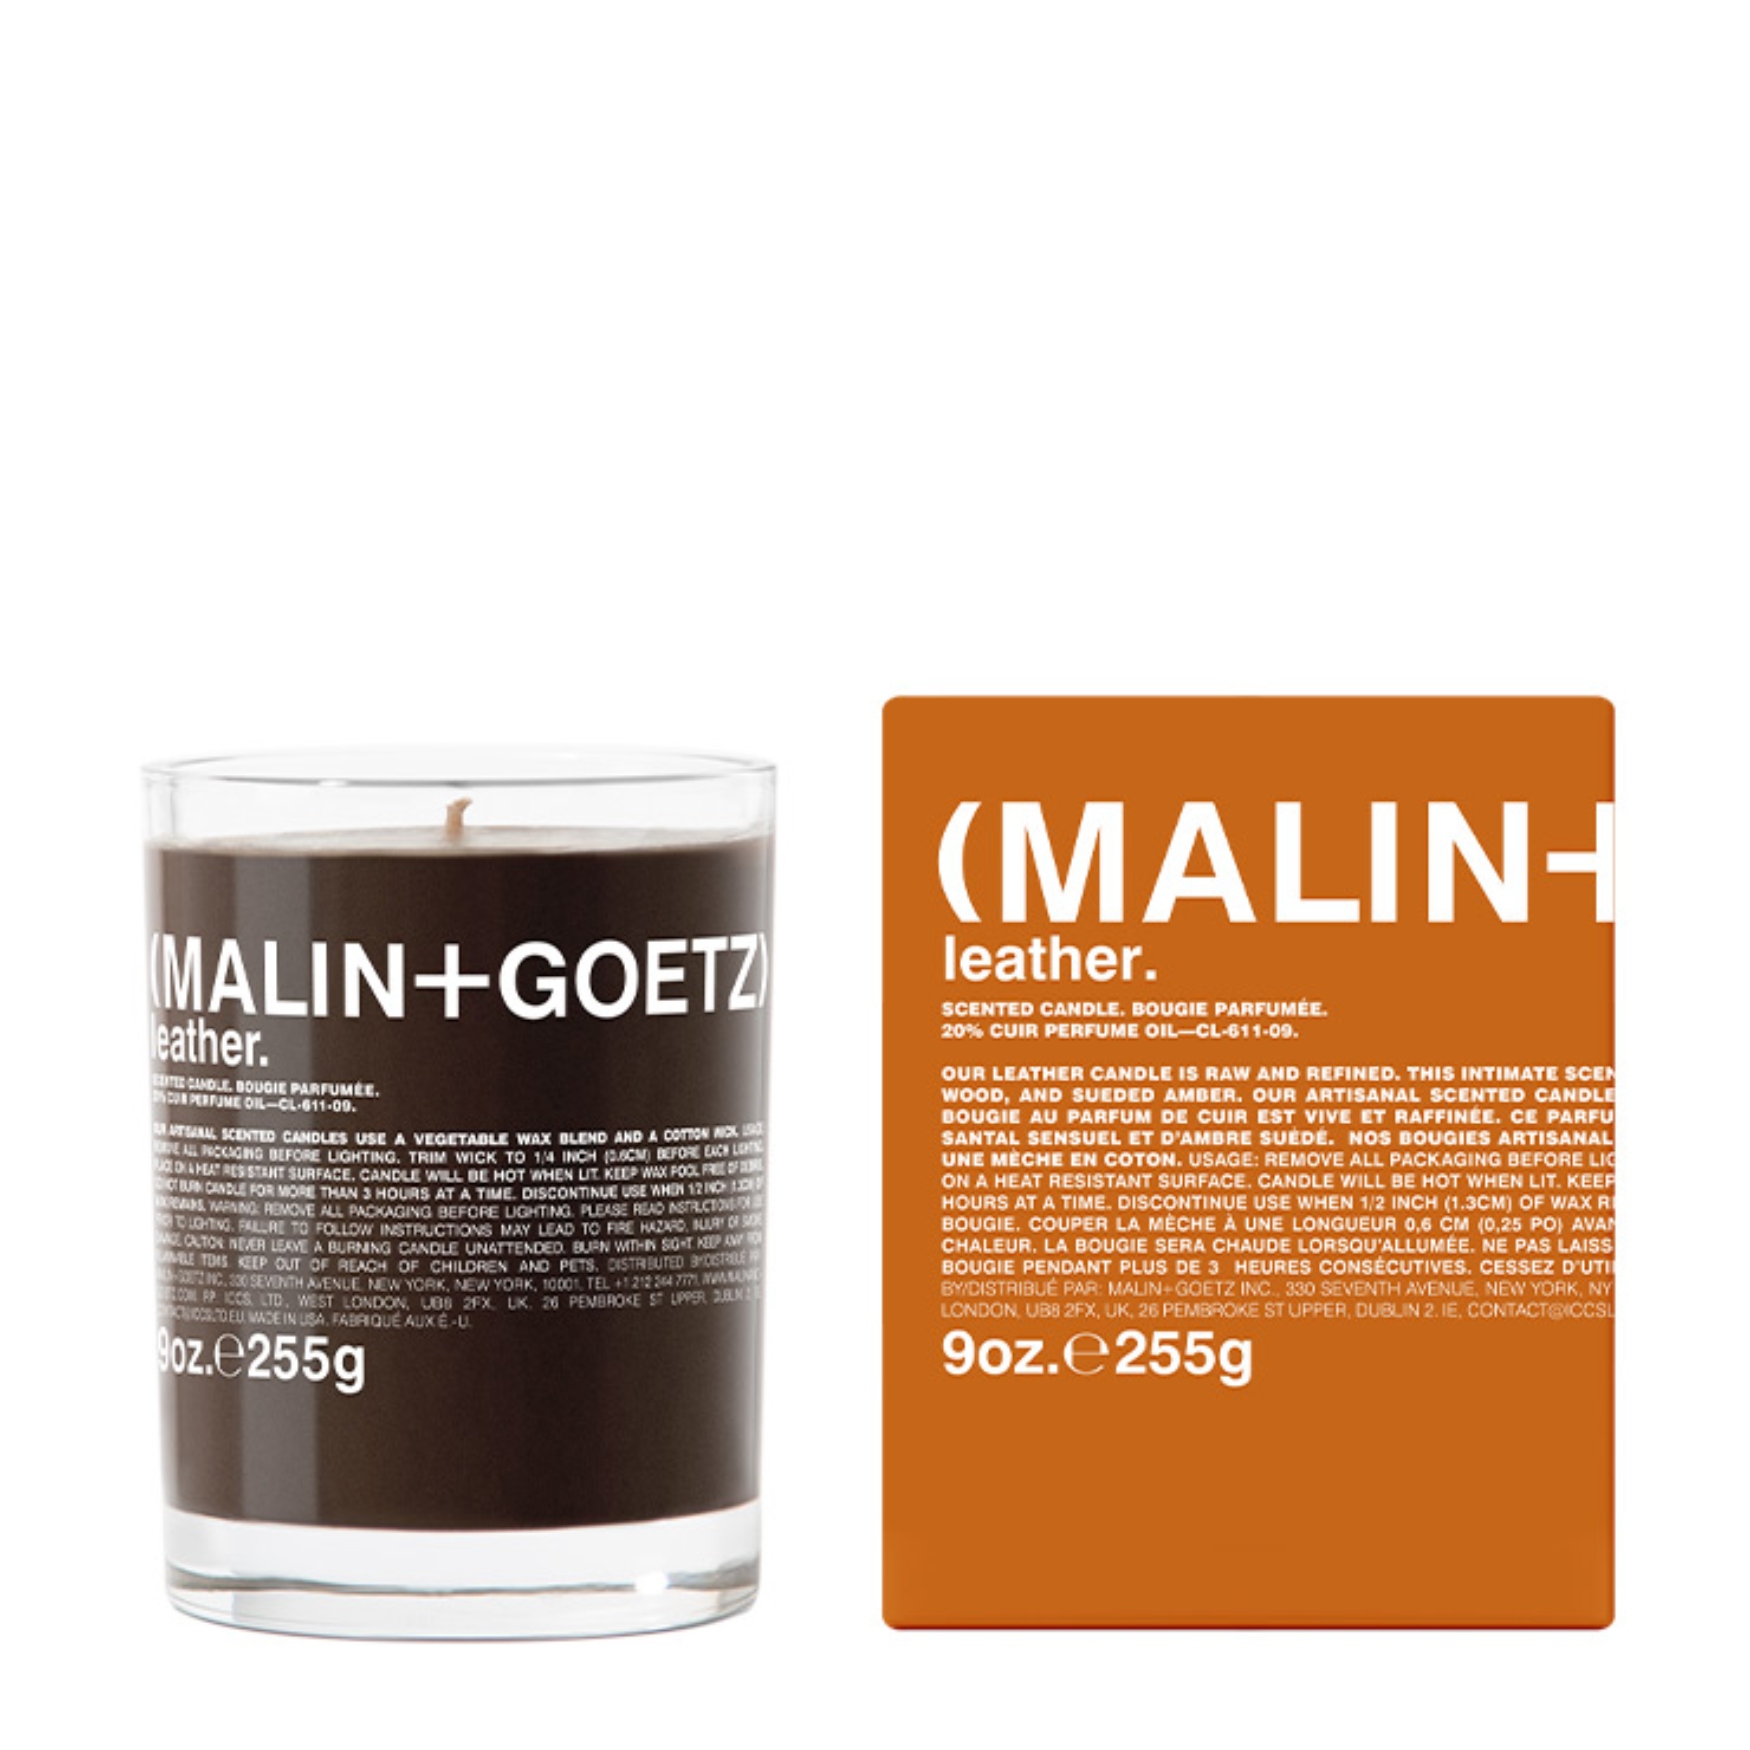 Malin + Goetz Leather Candle | Space NK